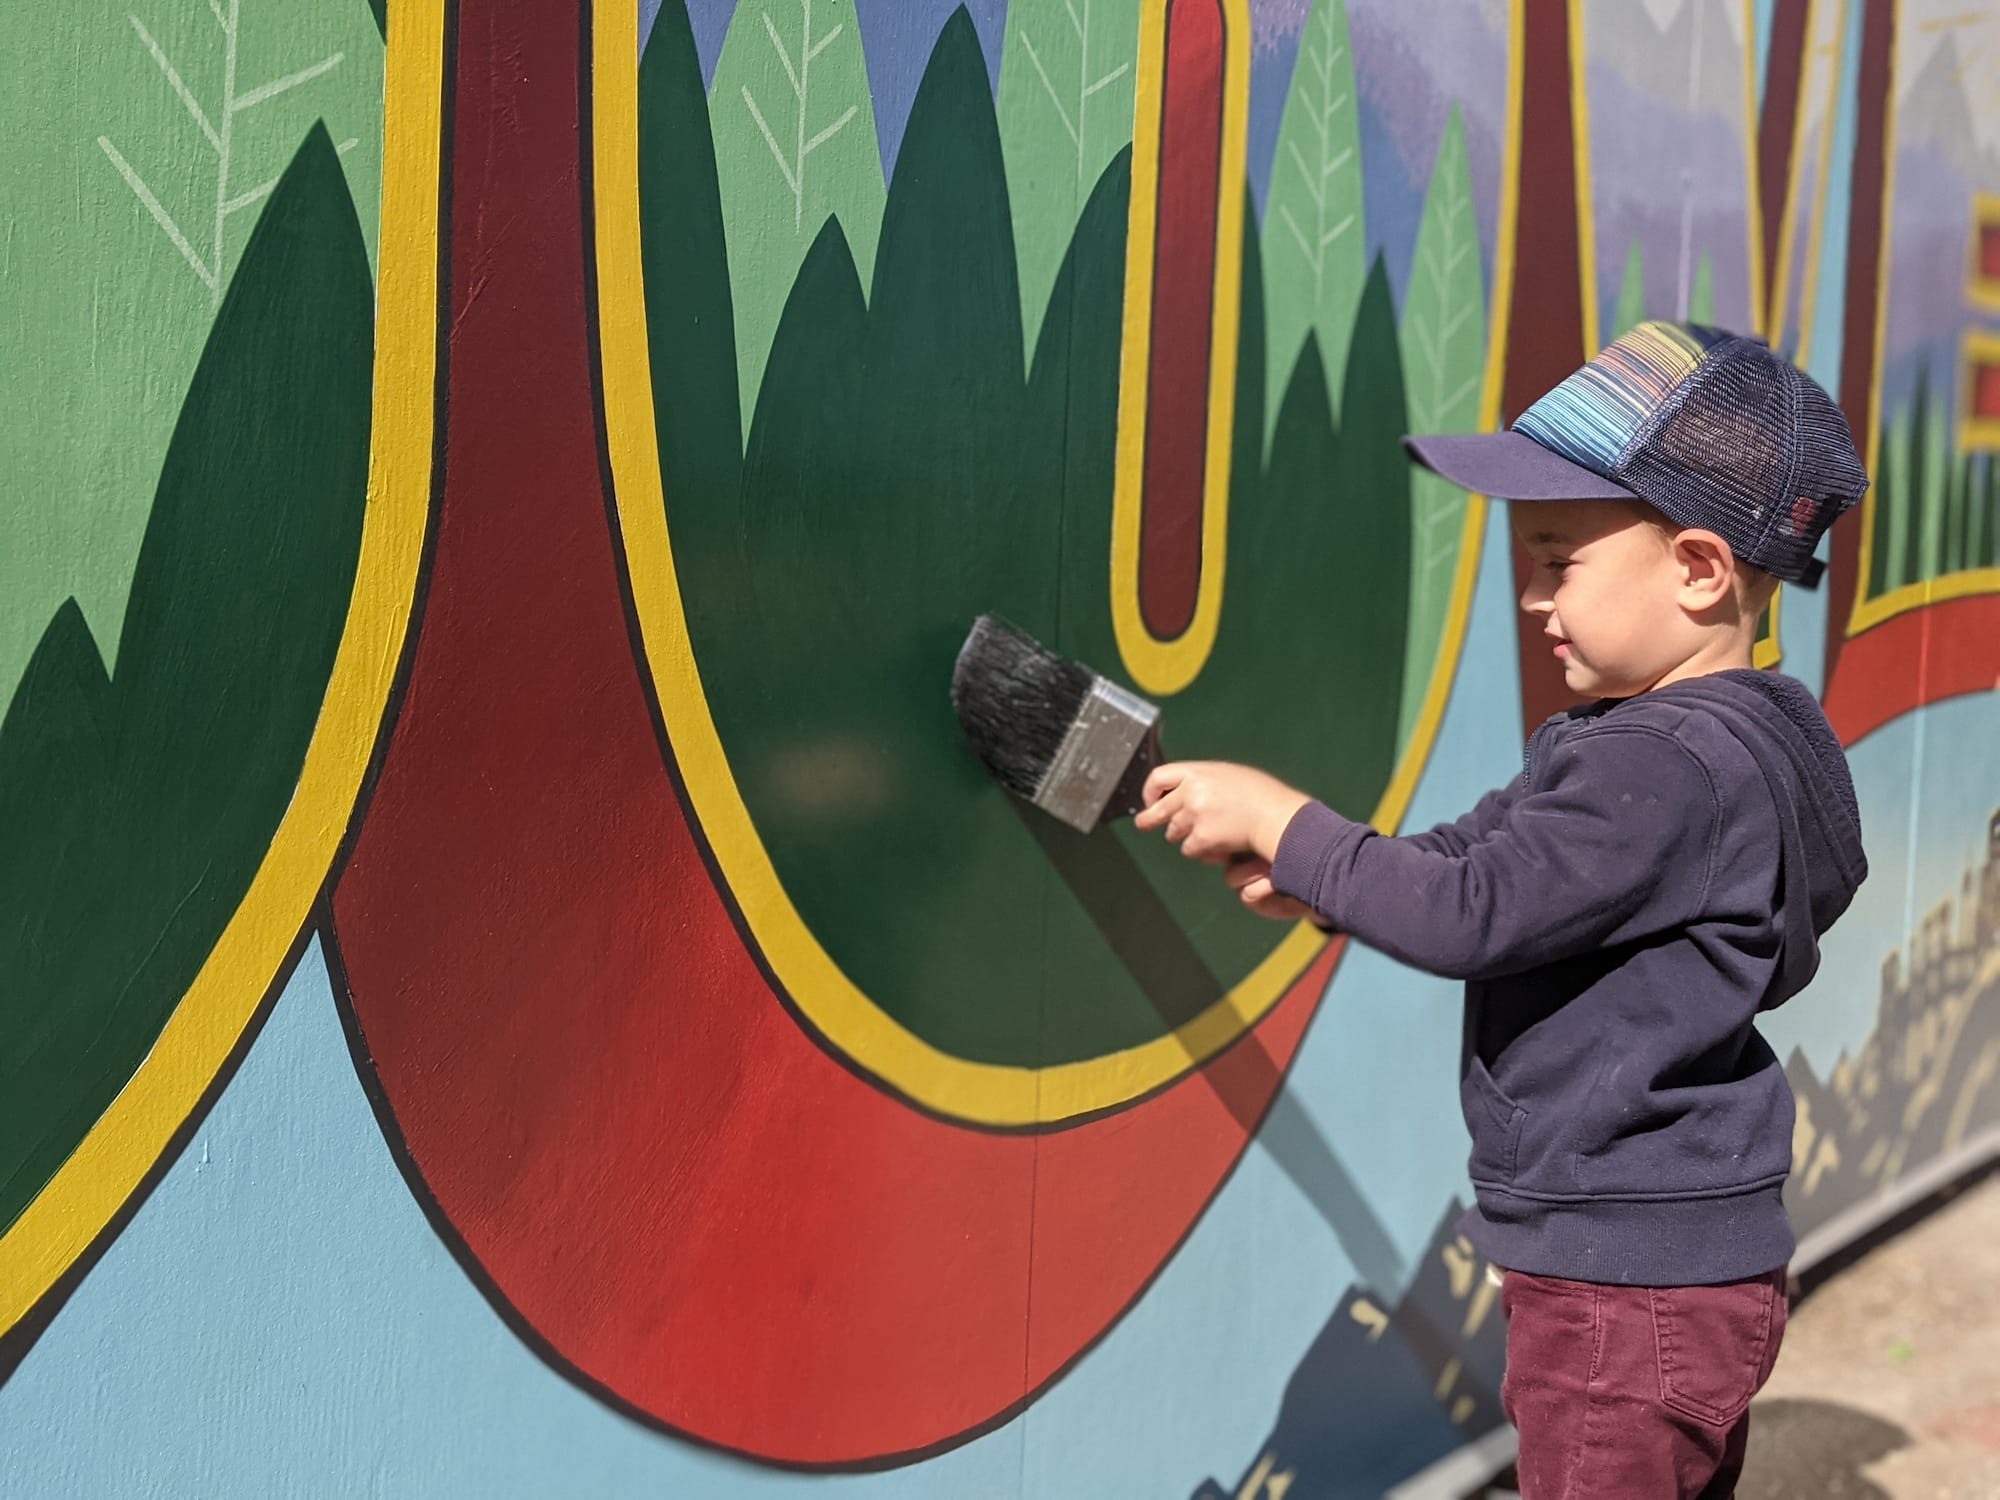 Young boy in a baseball cap painting a giant letter on a wall with a huge brush.